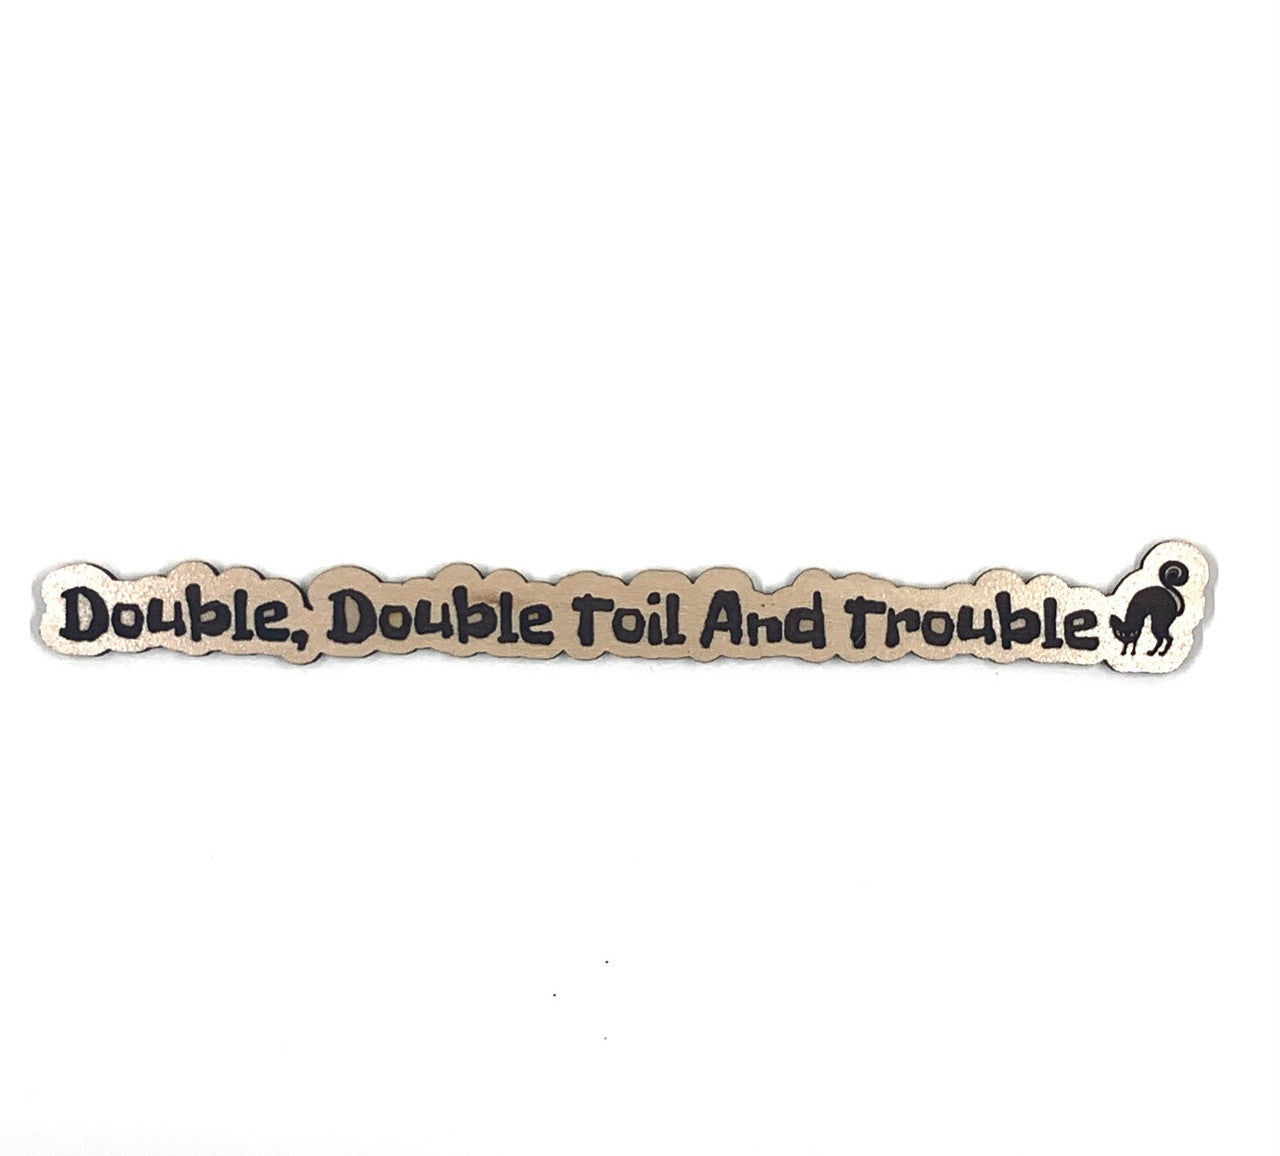 Double, Double Toil And Trouble Wooden Embellishment